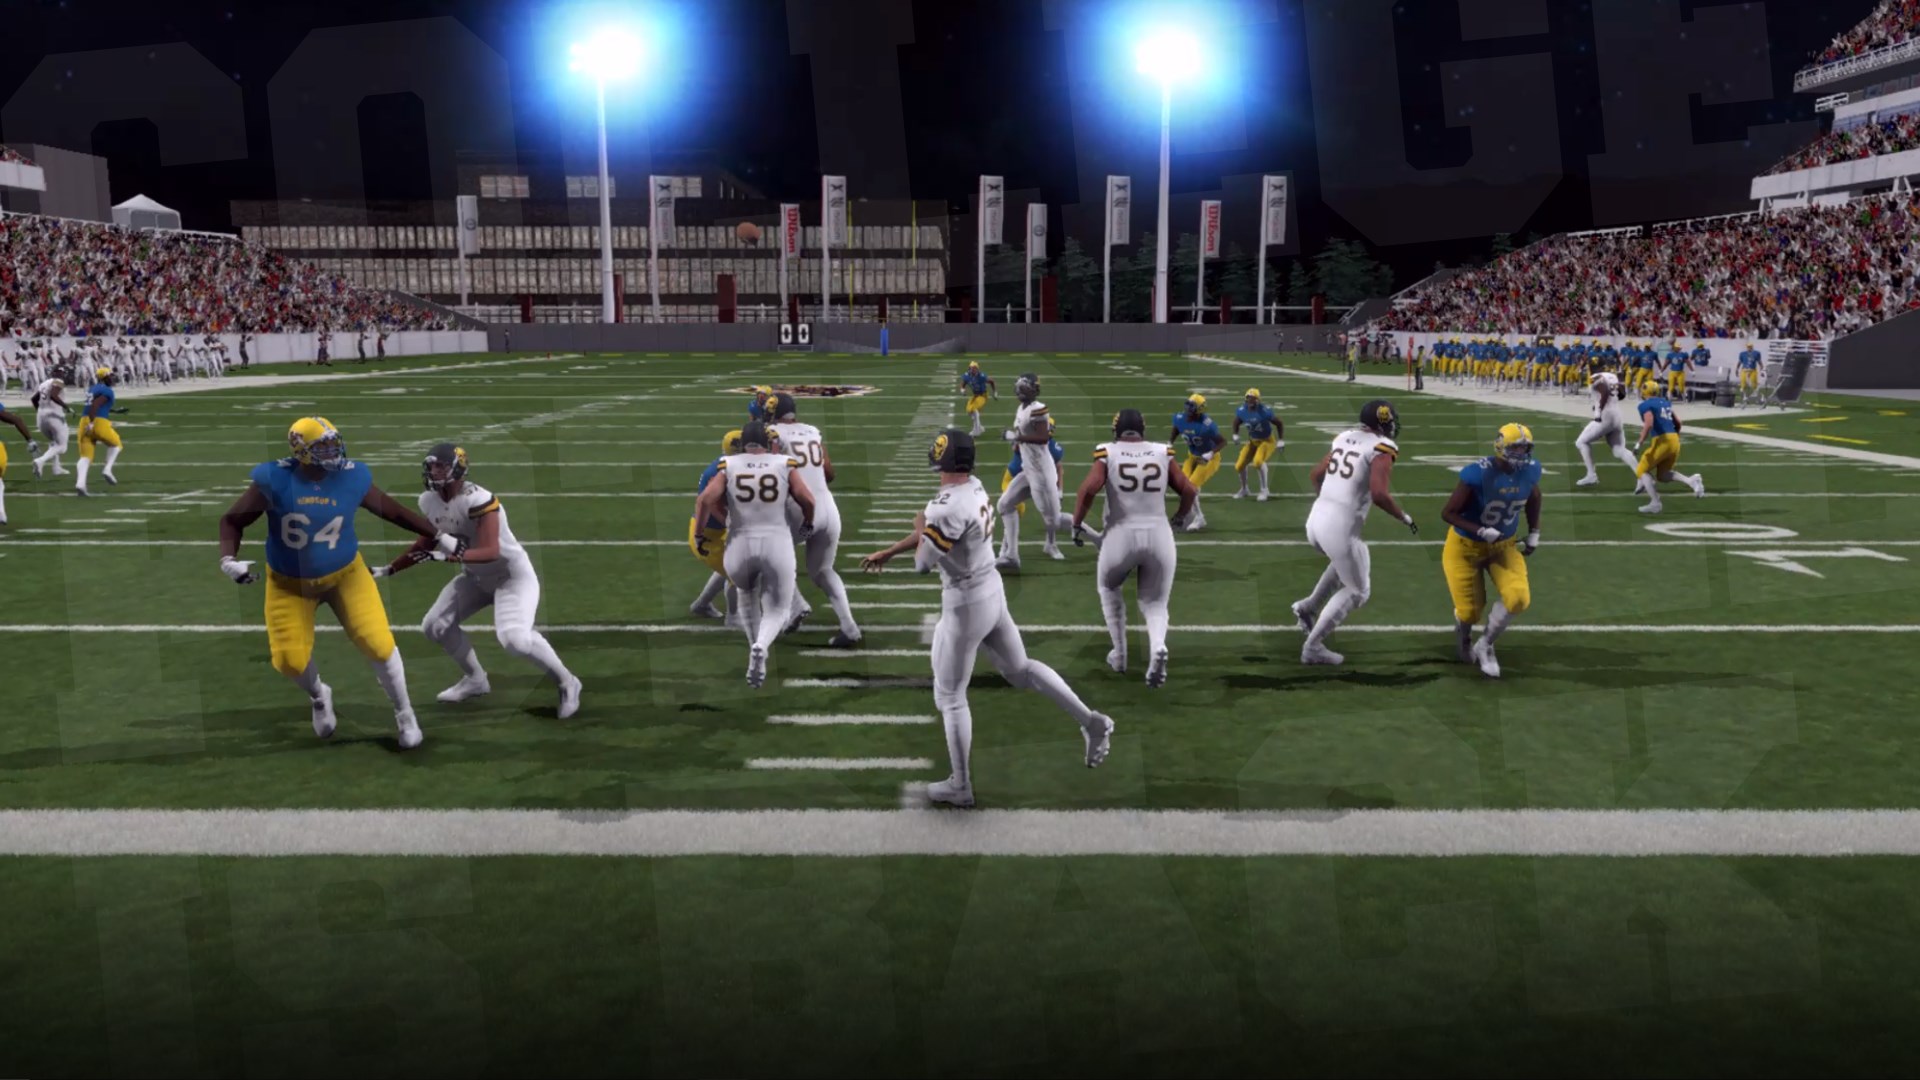 college football game xbox one